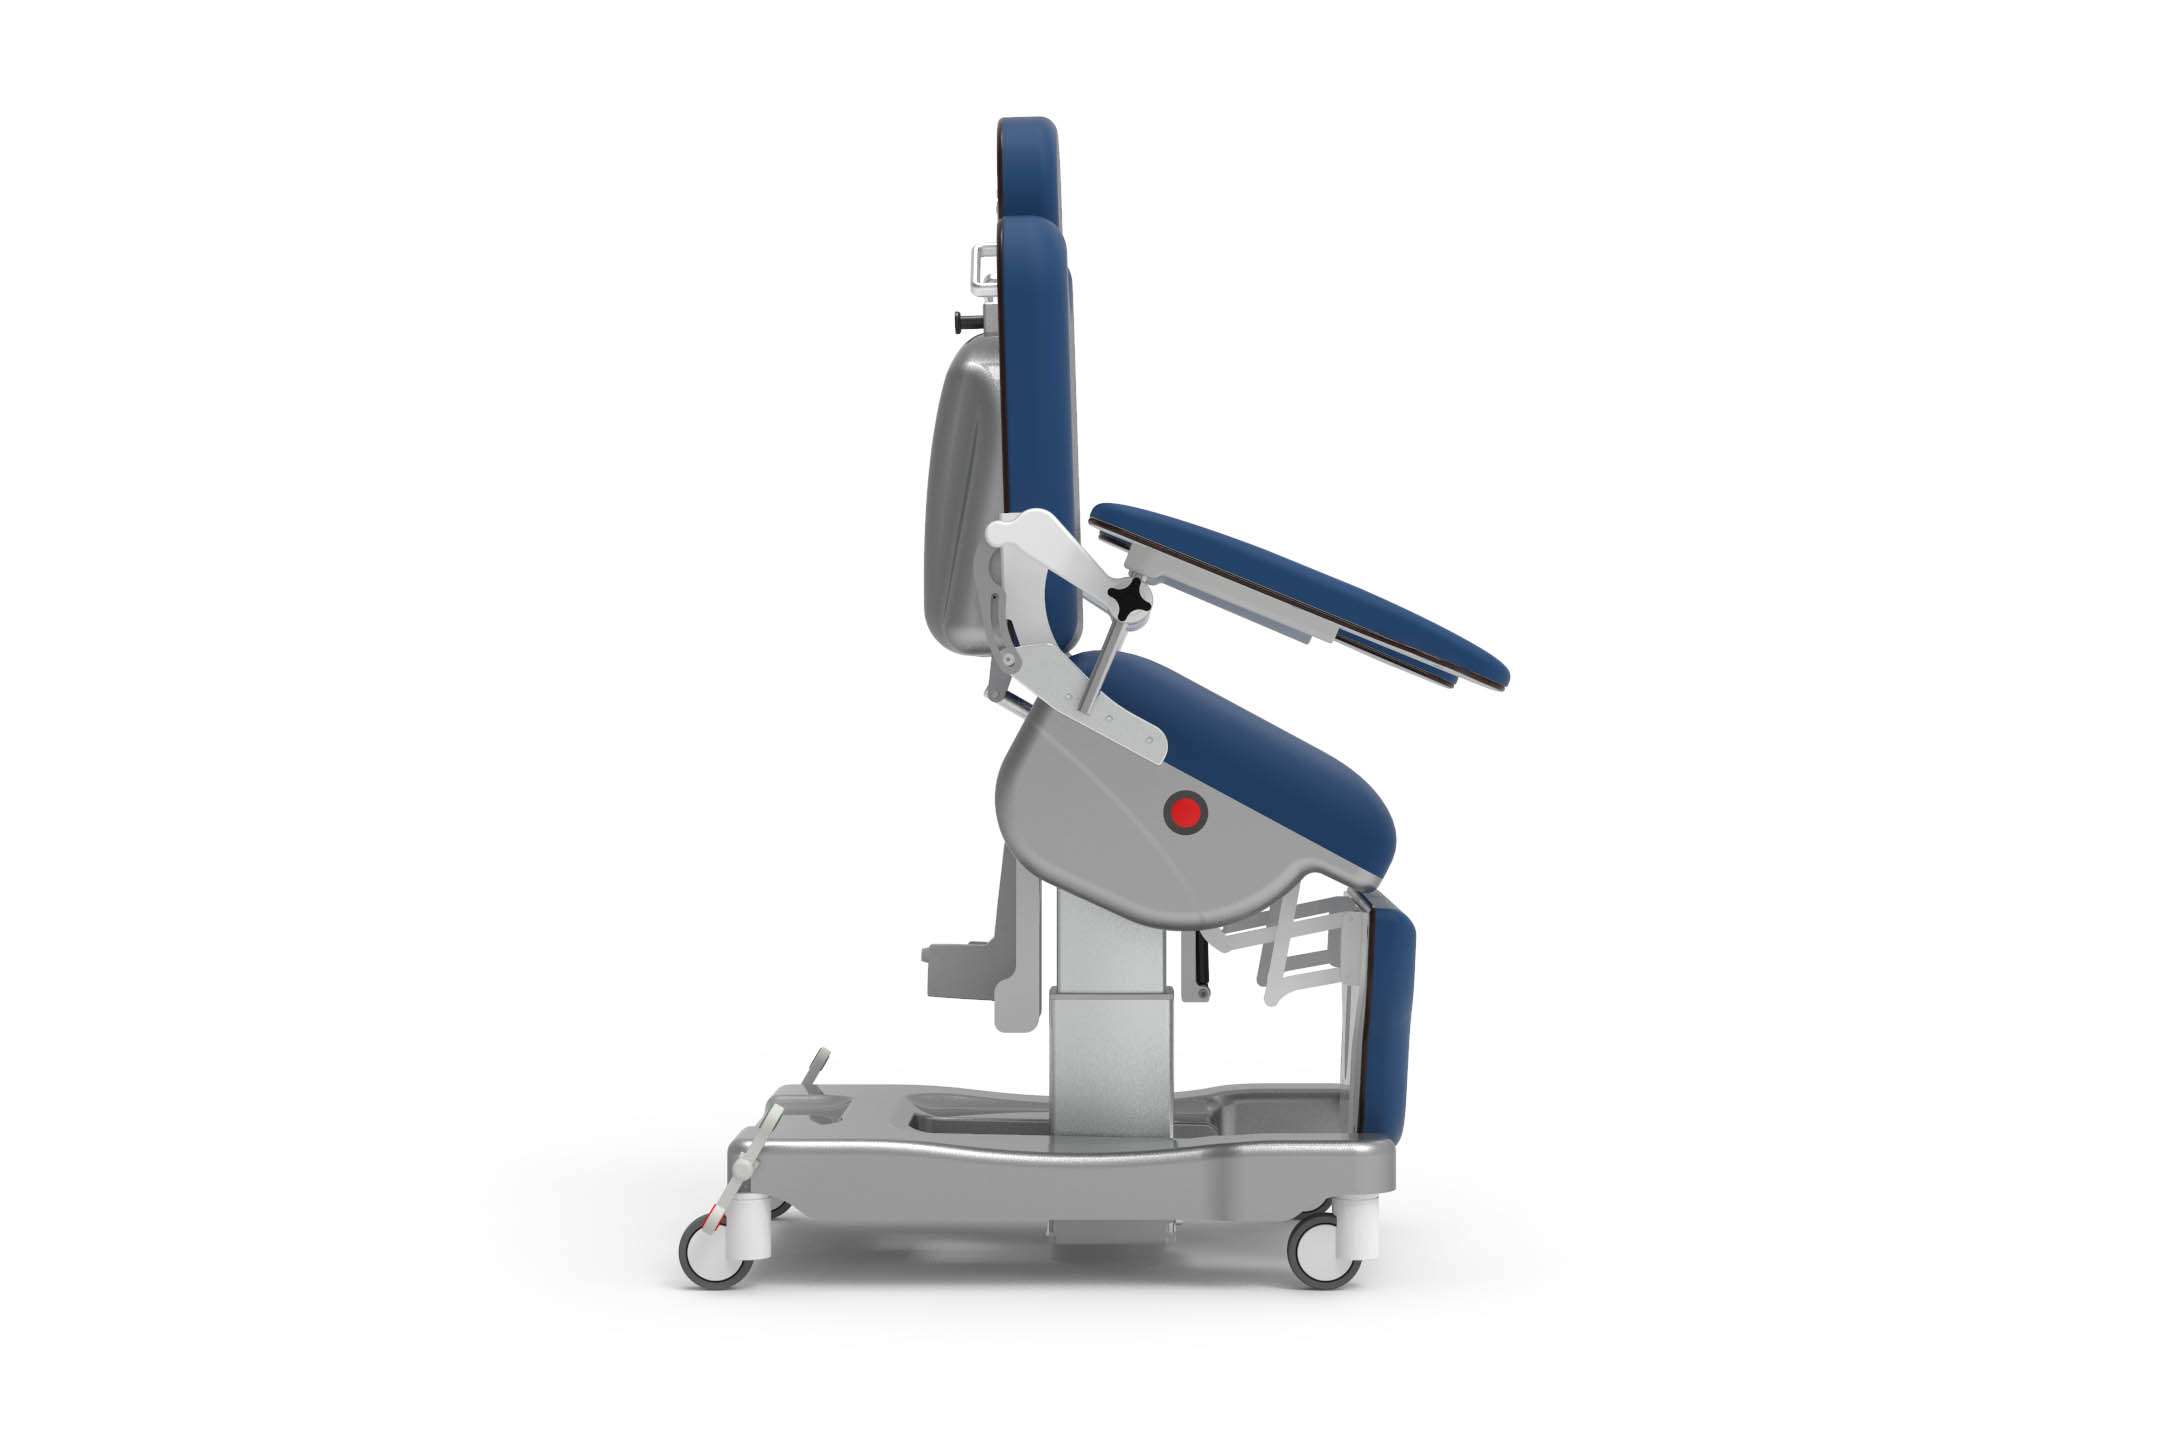 Product shot of the Gardhen Bilance hospital patient rehabilitation care with wheels. The image illustrates the electric lift up vertical rise feature.